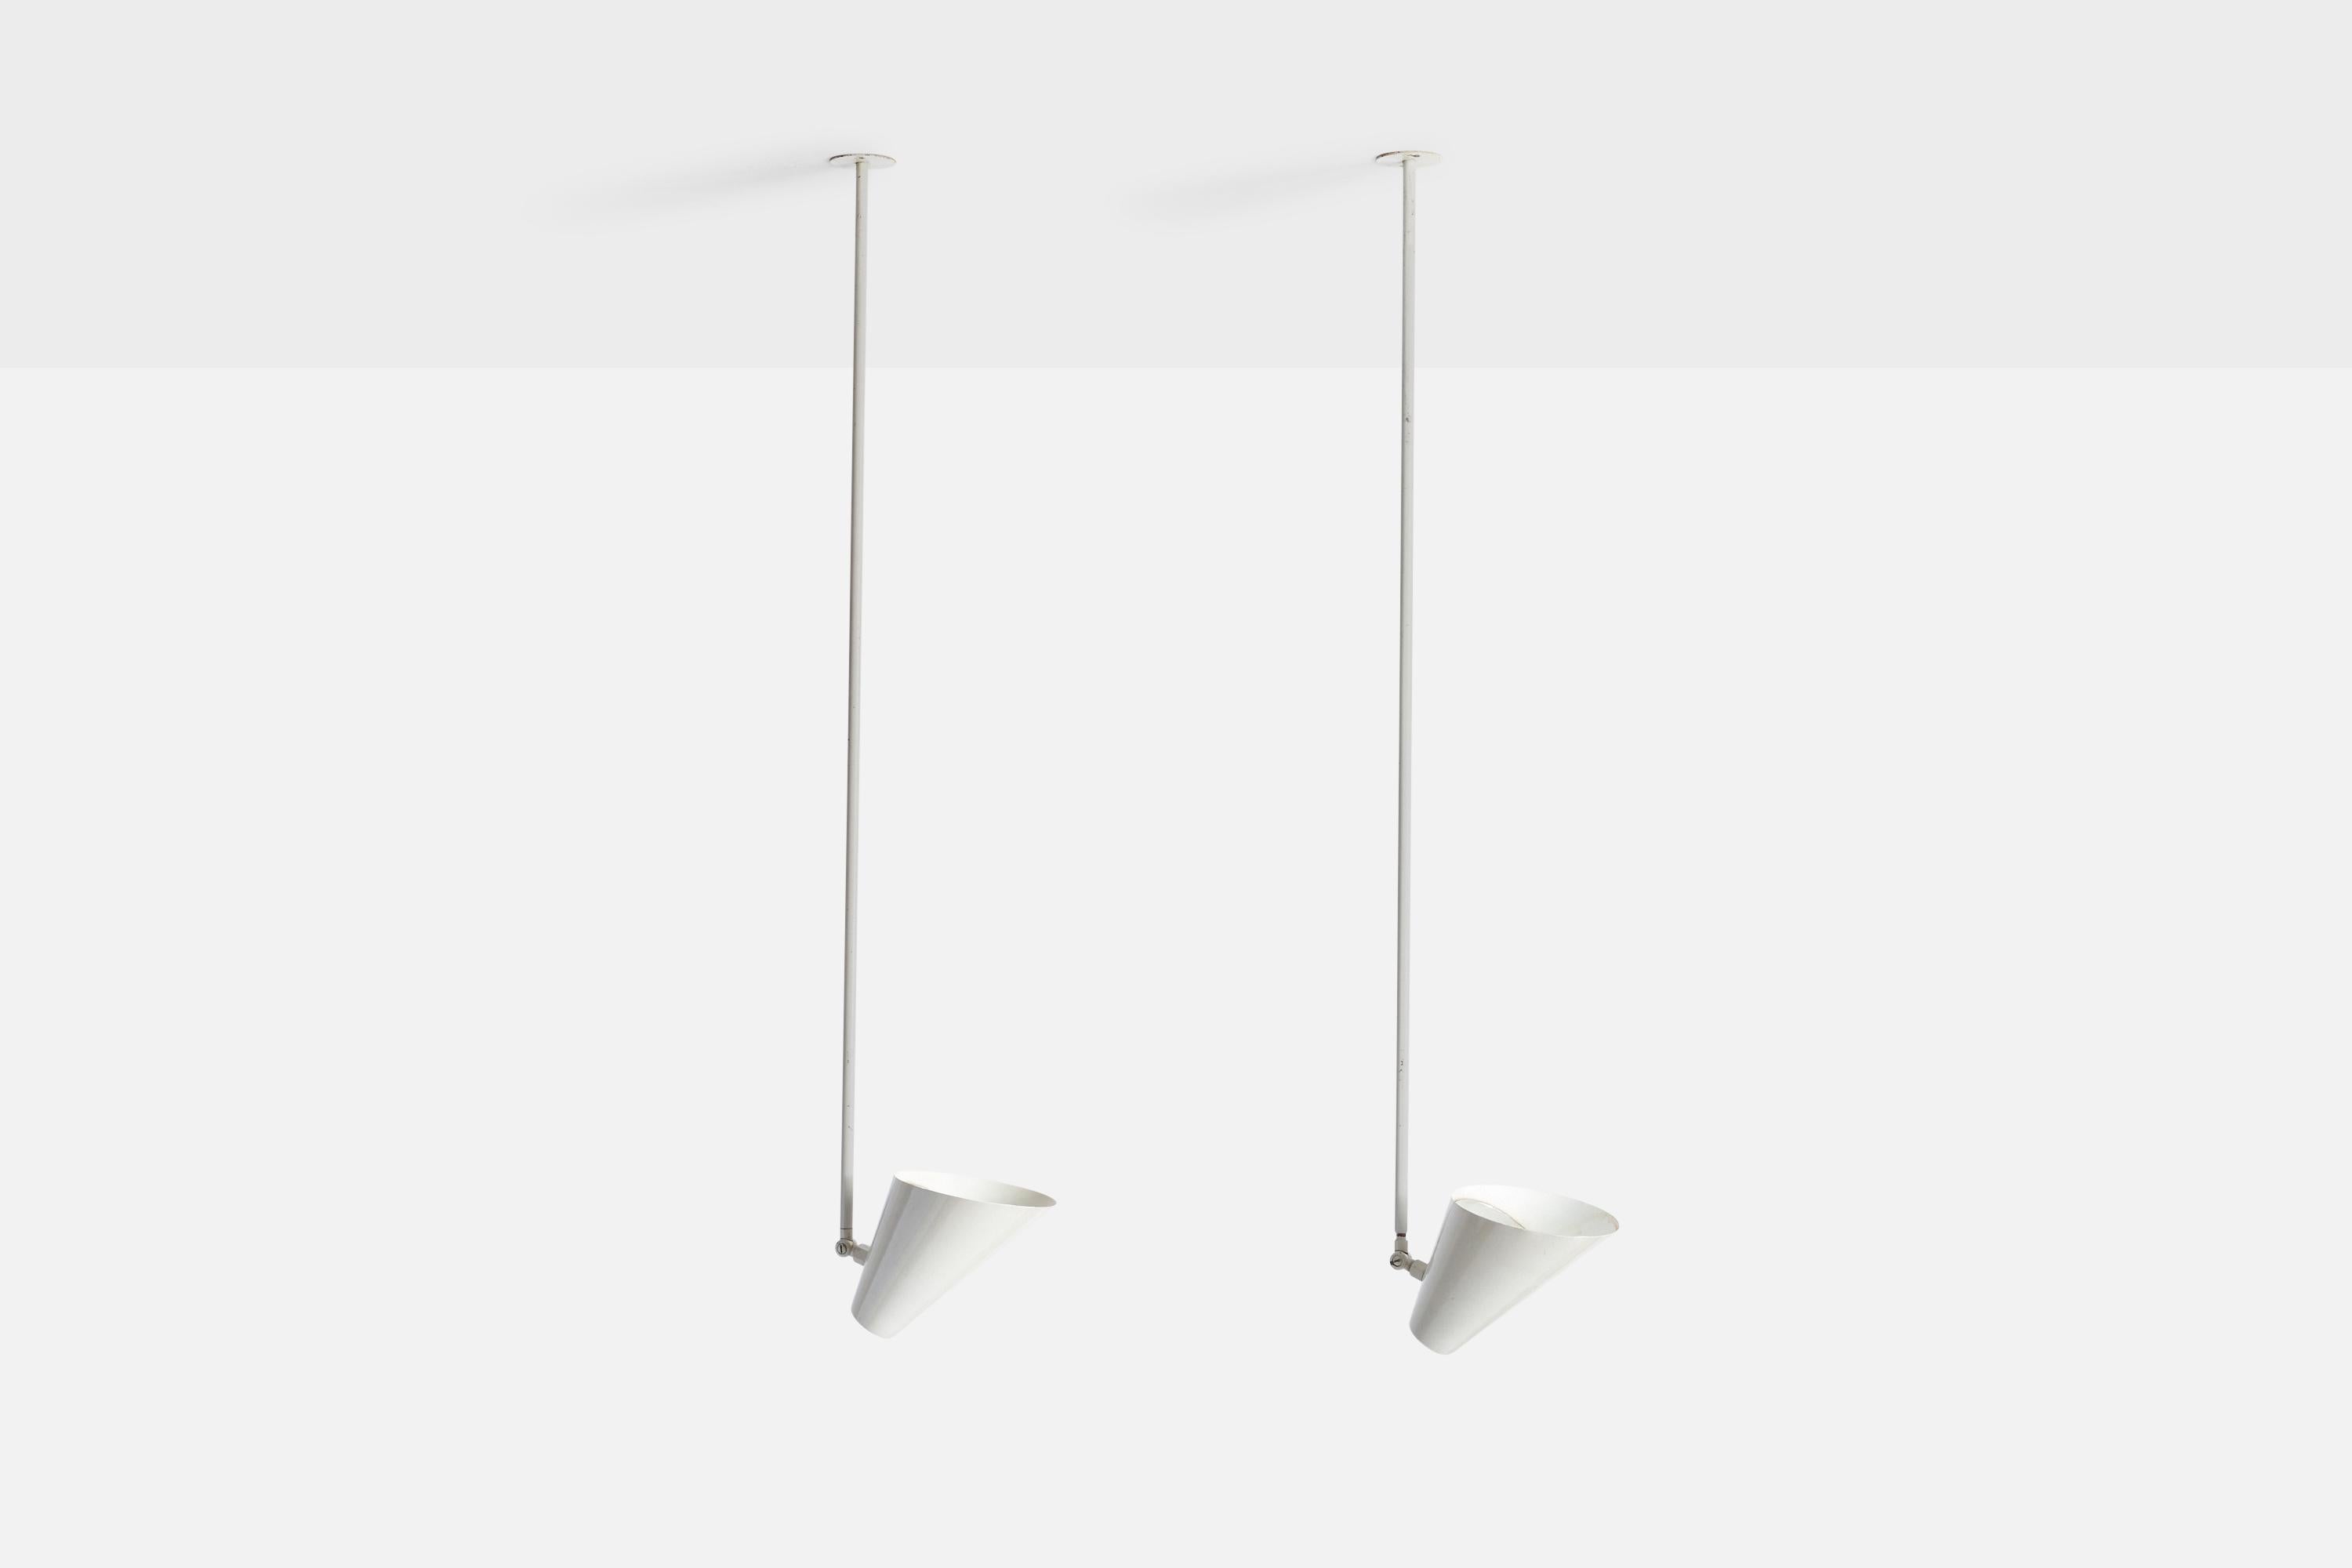 A pair of white lacquered metal pendant lights designed by Vilhelm Lauritzen and produced by Louis Poulsen, Denmark, c. 1950s.

Dimensions of canopy (inches): N/A
Socket takes standard E-26 bulbs. 2 sockets.There is no maximum wattage stated on the